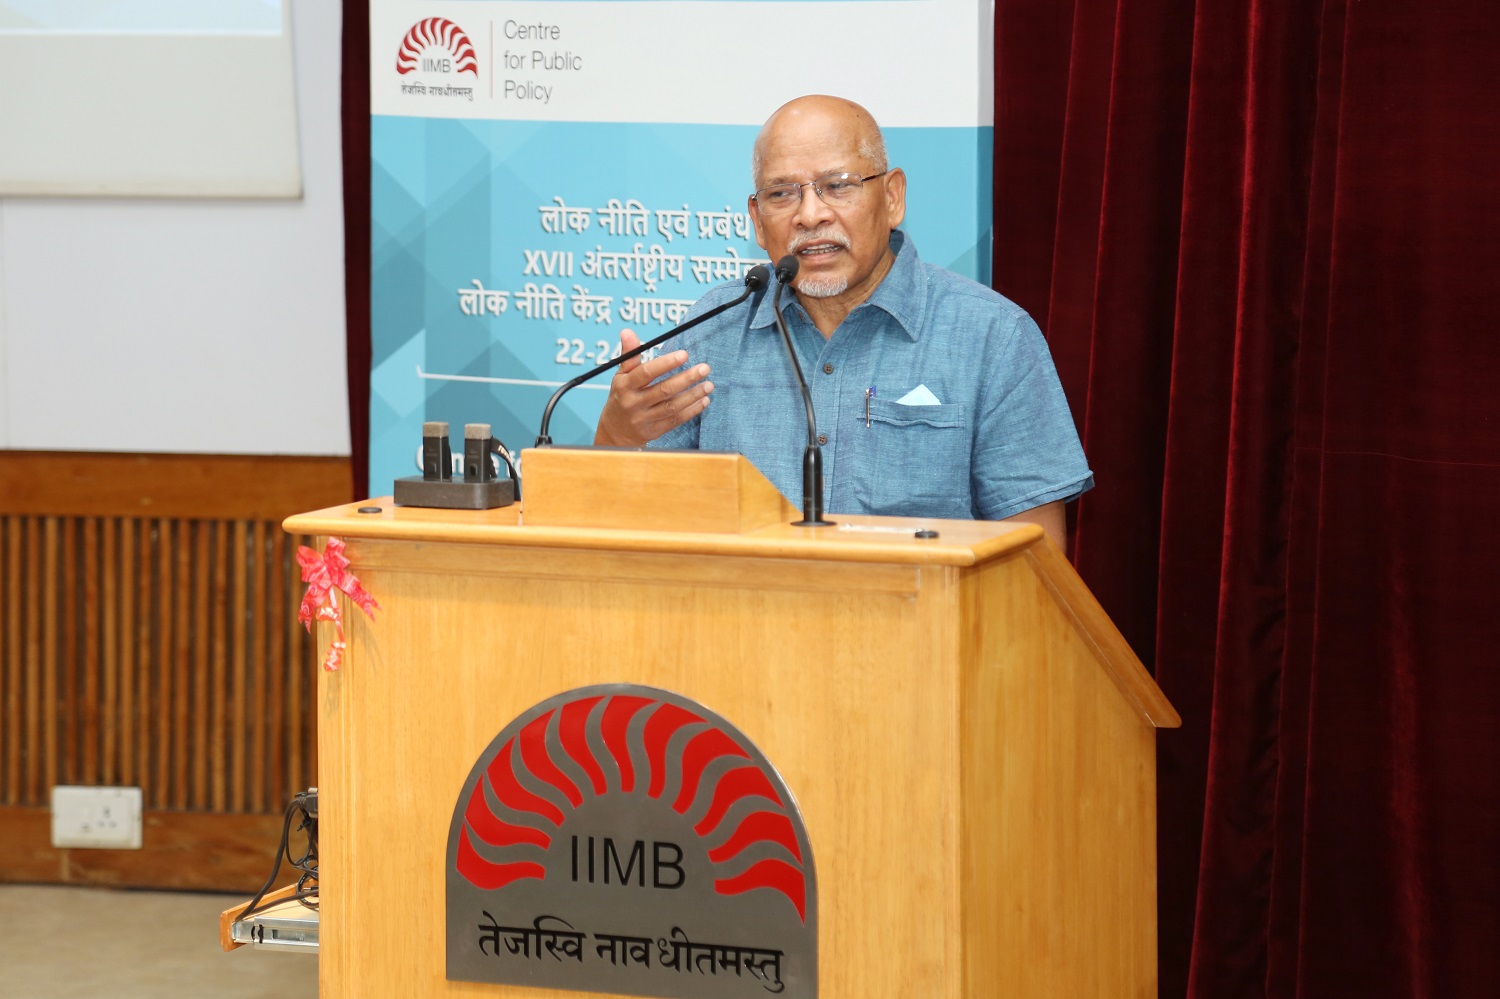 Dr. Virginius Xaxa, Visiting Professor at the Institute for Human Development, New Delhi, delivers the Valedictory address at the XVII International Conference on Public Policy & Management at IIM Bangalore, on 24th August 2022.